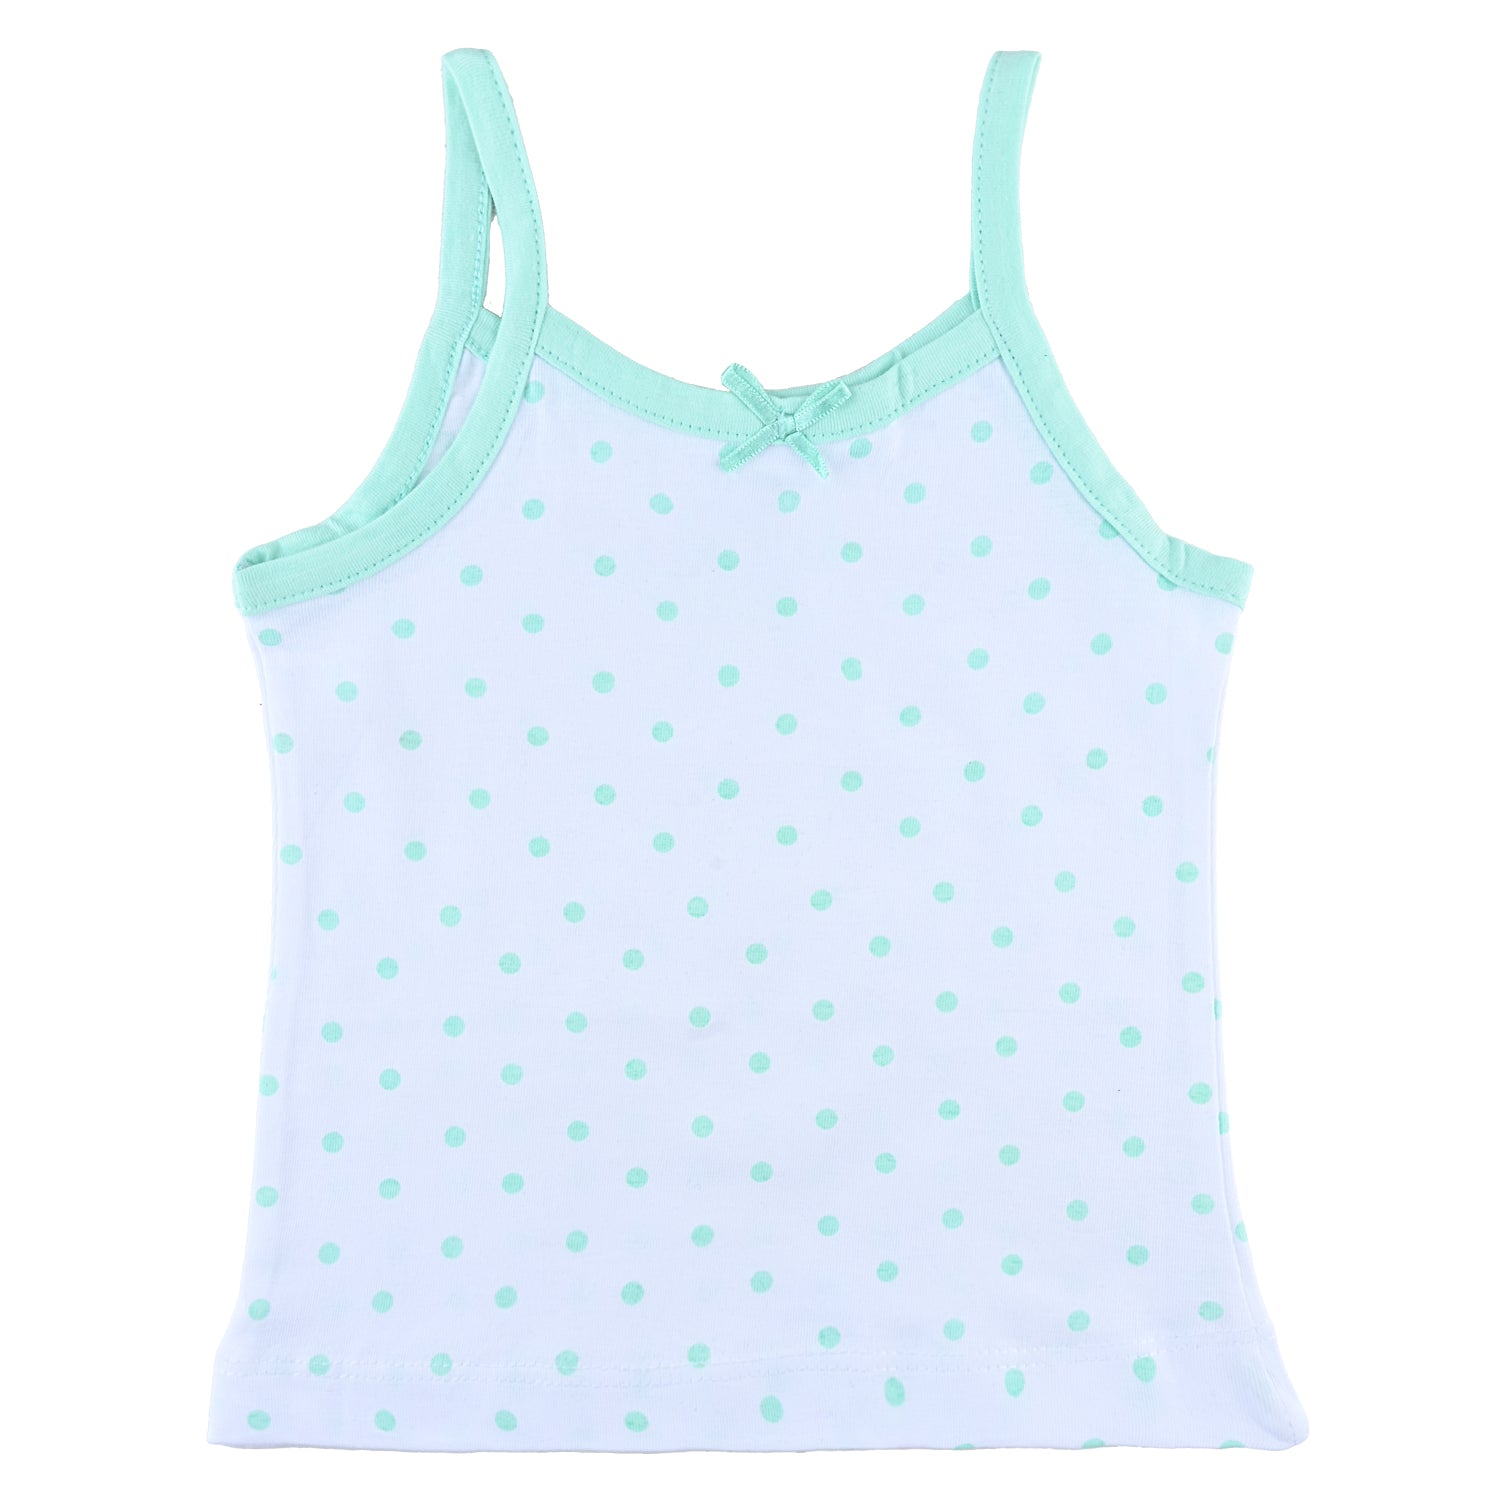 Nuluv Girl's Camisole